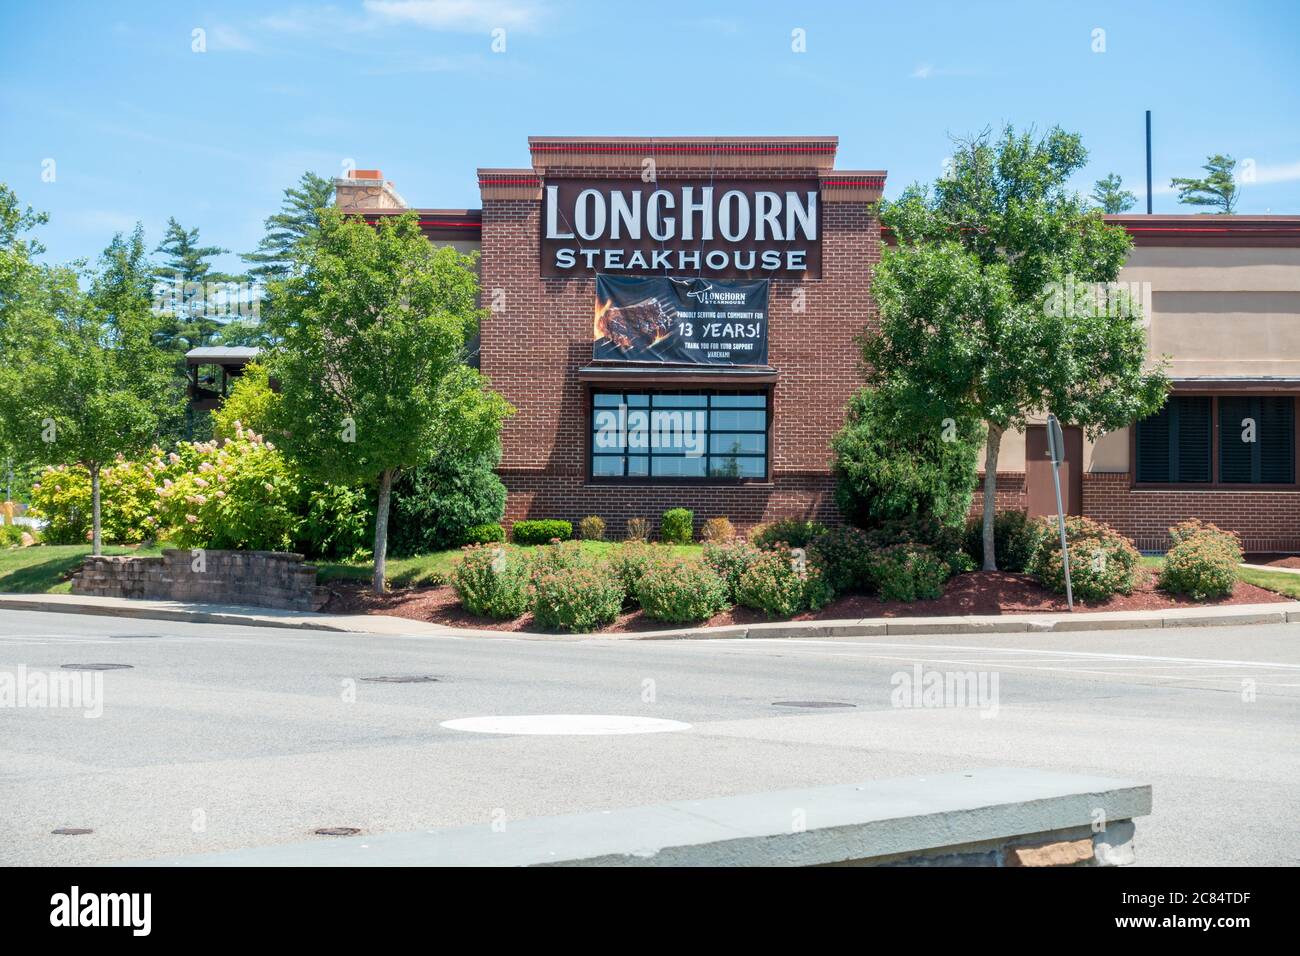 Longhorn Steakhouse restaurant chain exterior with sign on brick building, part of Darden Restaurants, Inc. Stock Photo